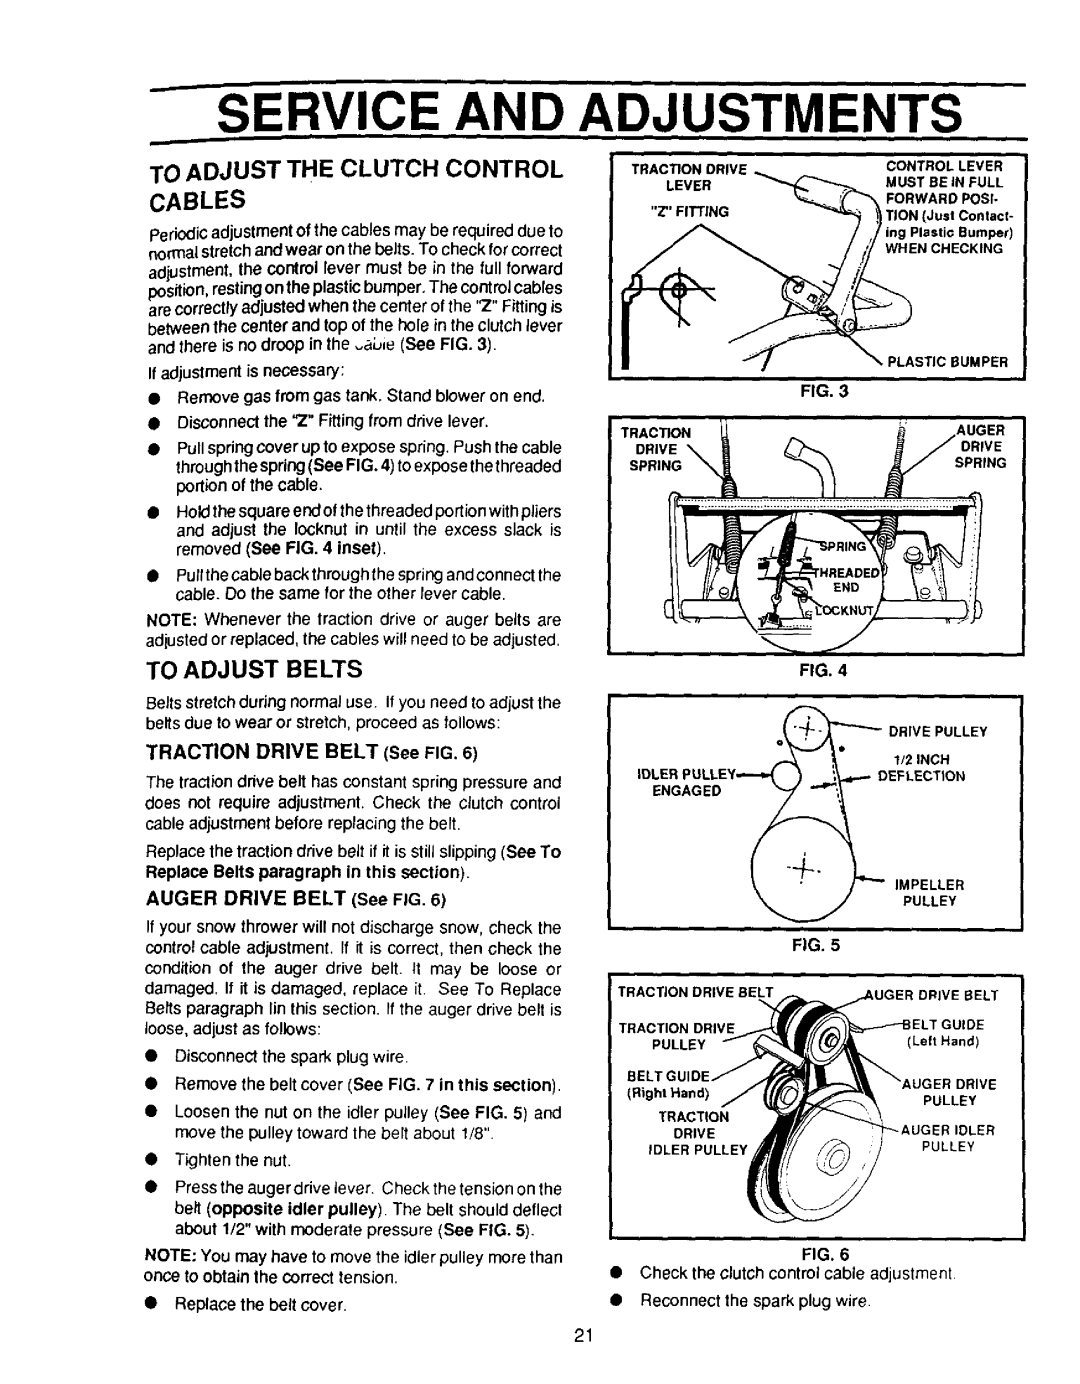 Sears 536.886331 owner manual Service And, Adjustments, To Adjust The Clutch Control Cables, To Adjust Belts 